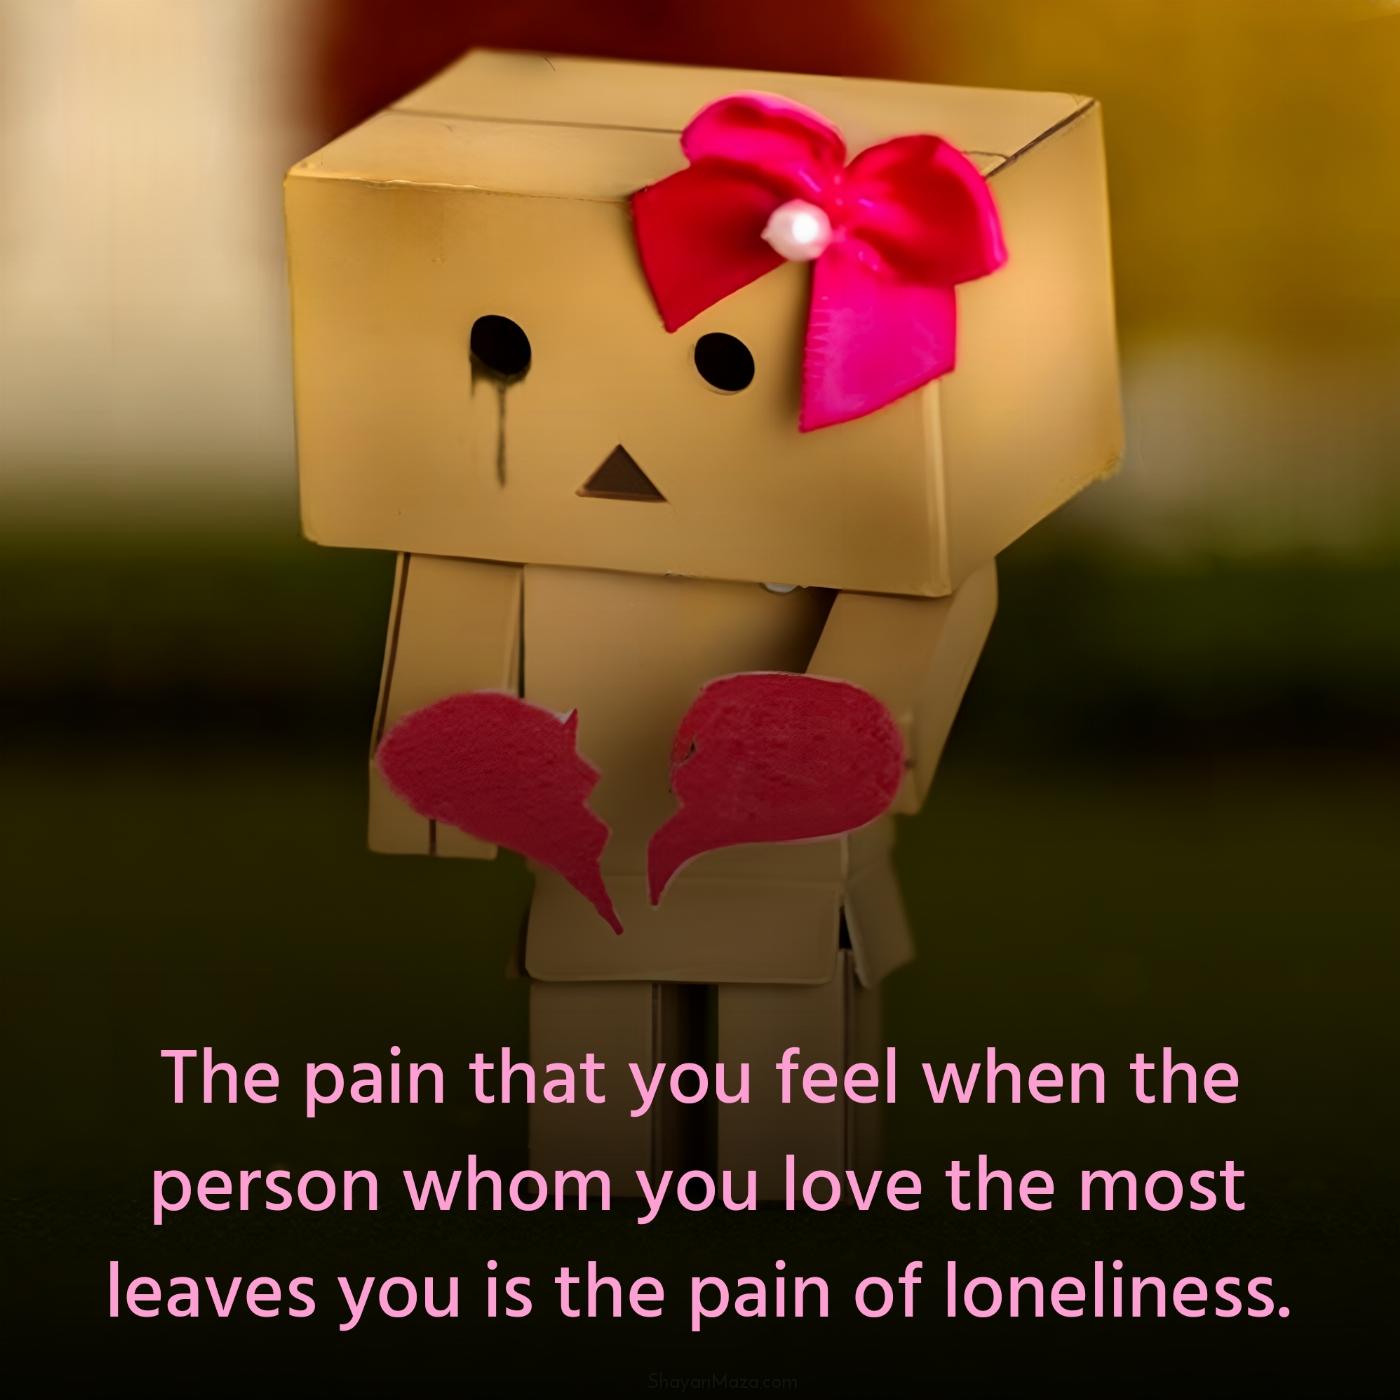 The pain that you feel when the person whom you love